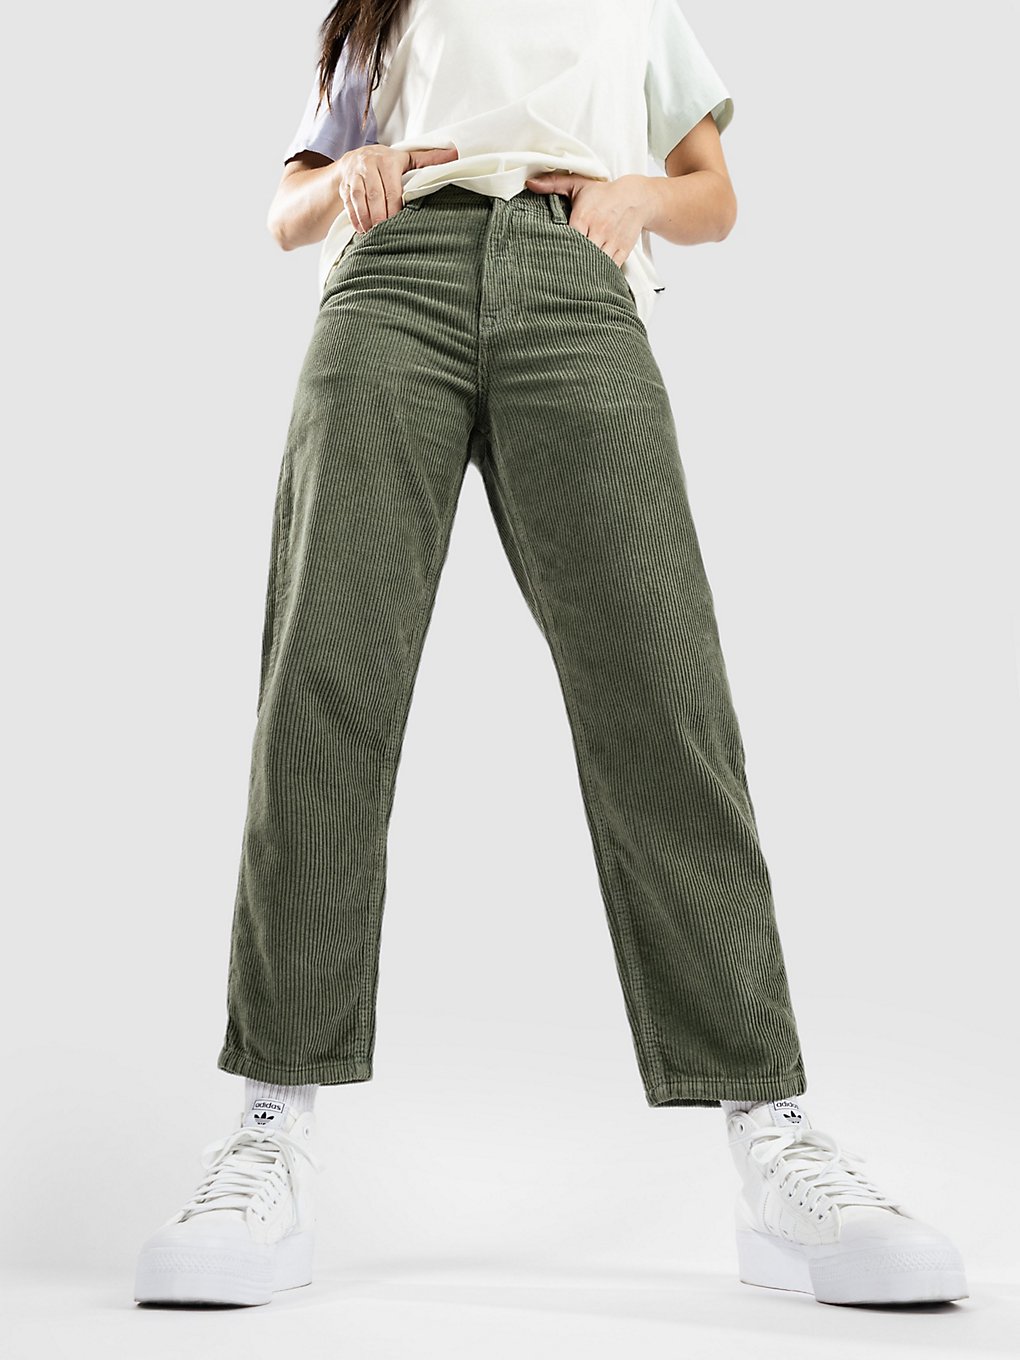 Homeboy X-Tra BAGGY Cordhose olive kaufen